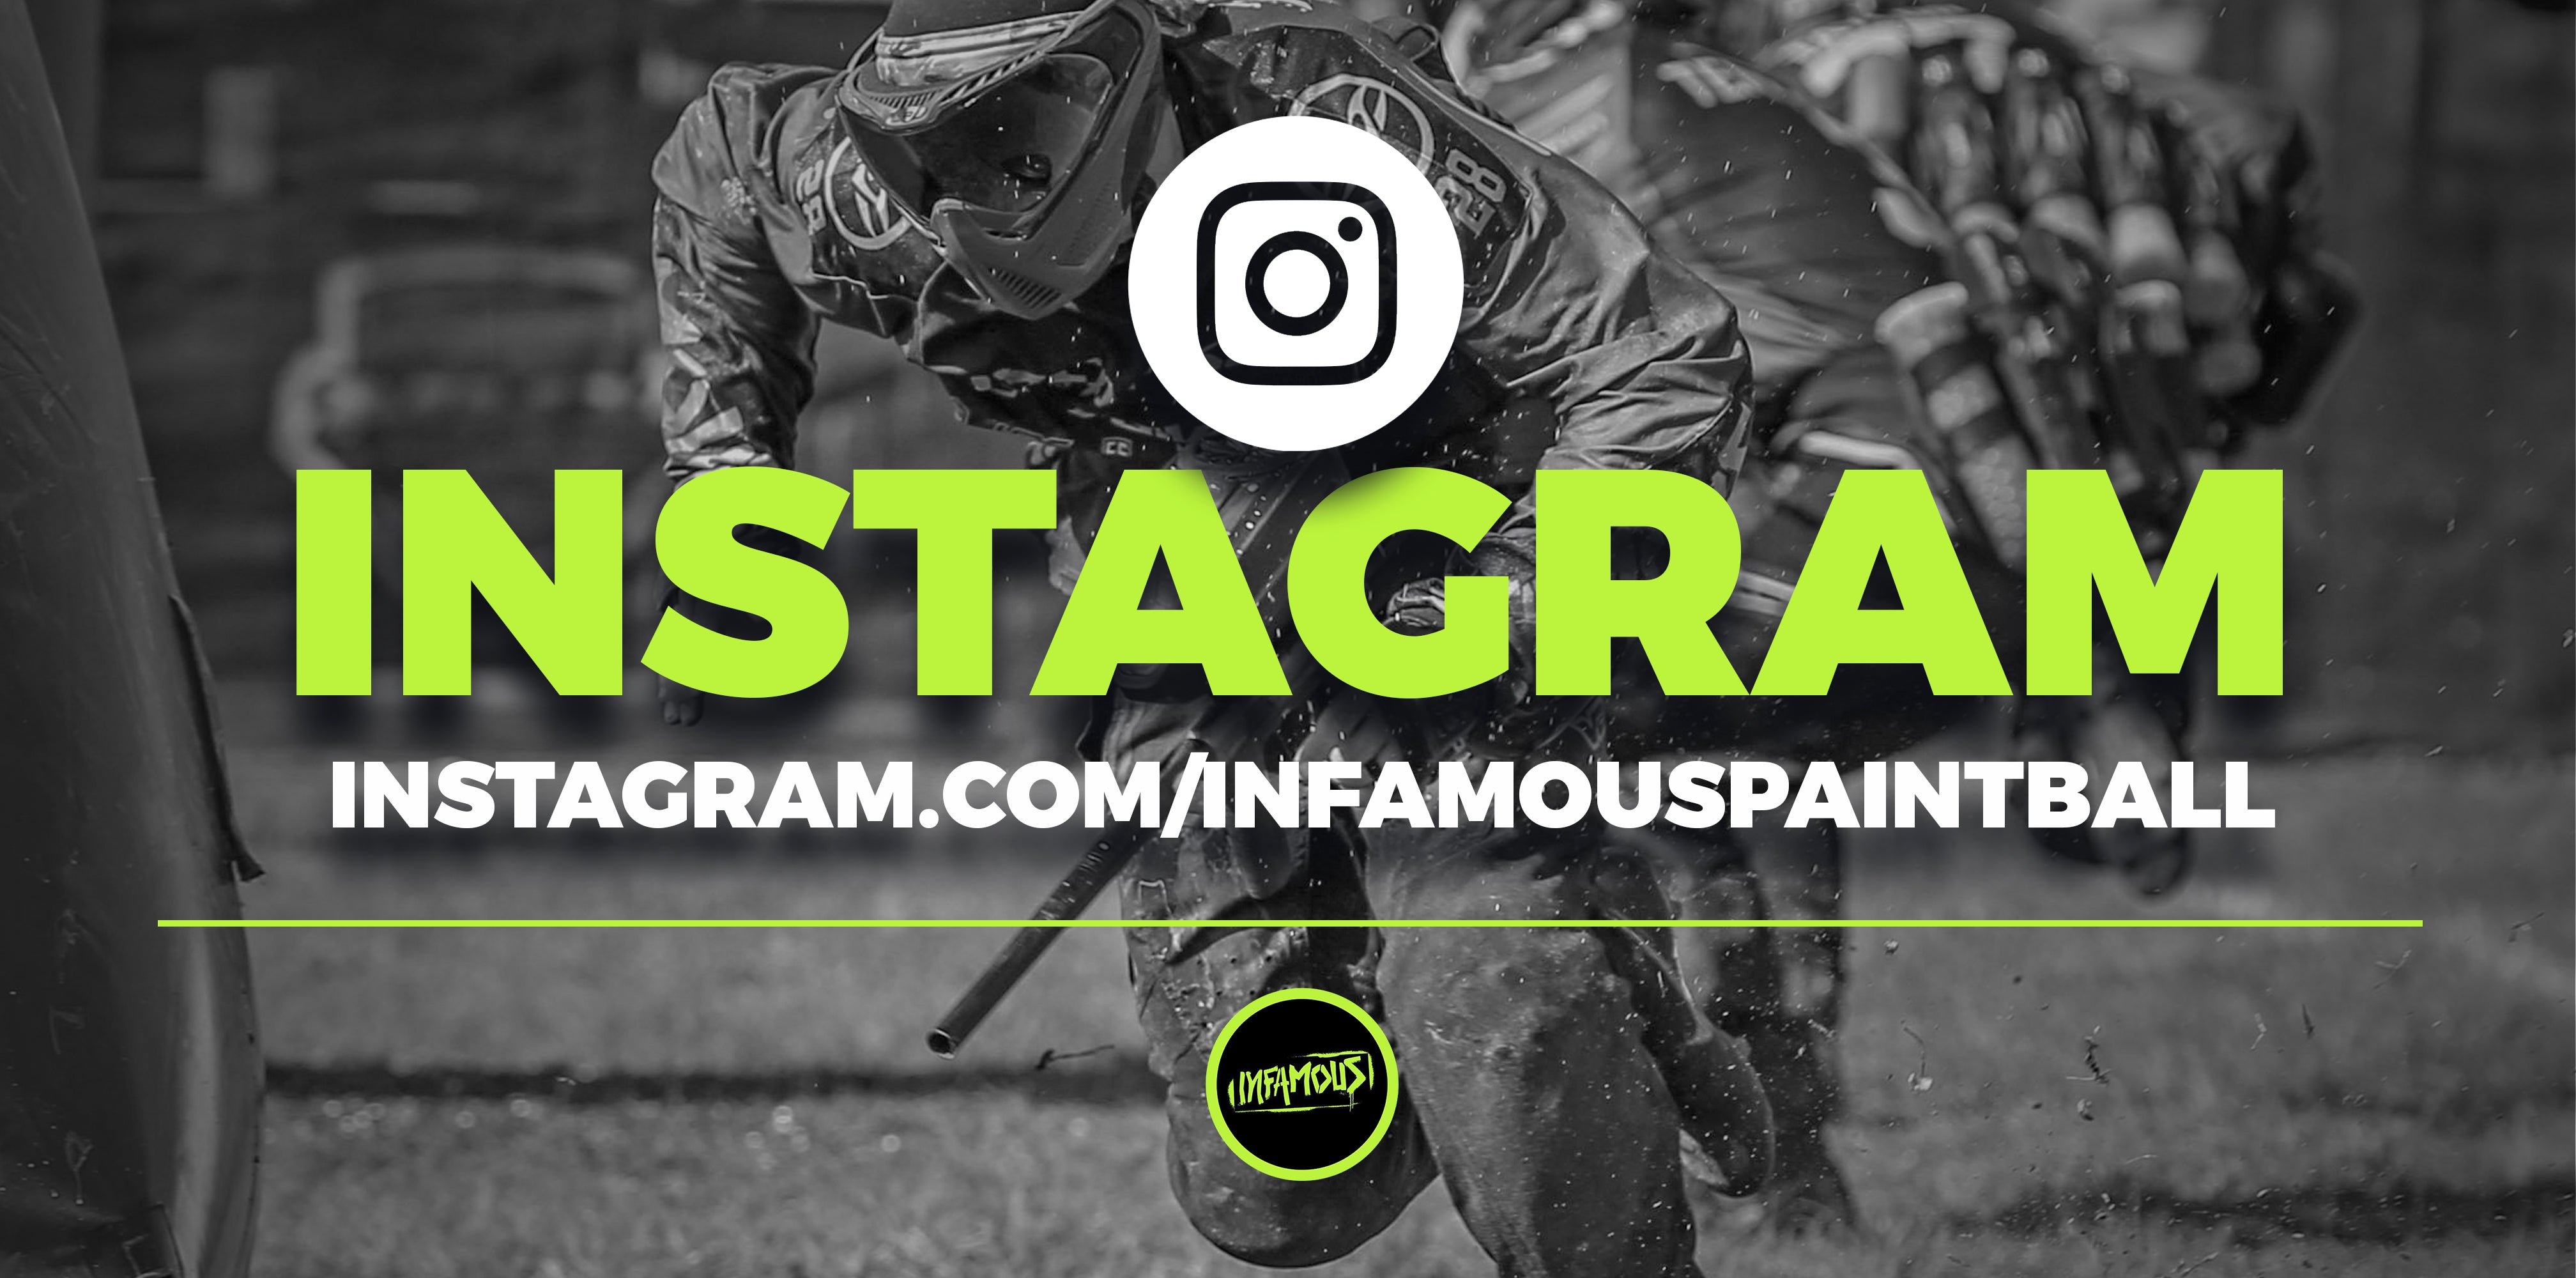 Infamous Paintball Instagram Link